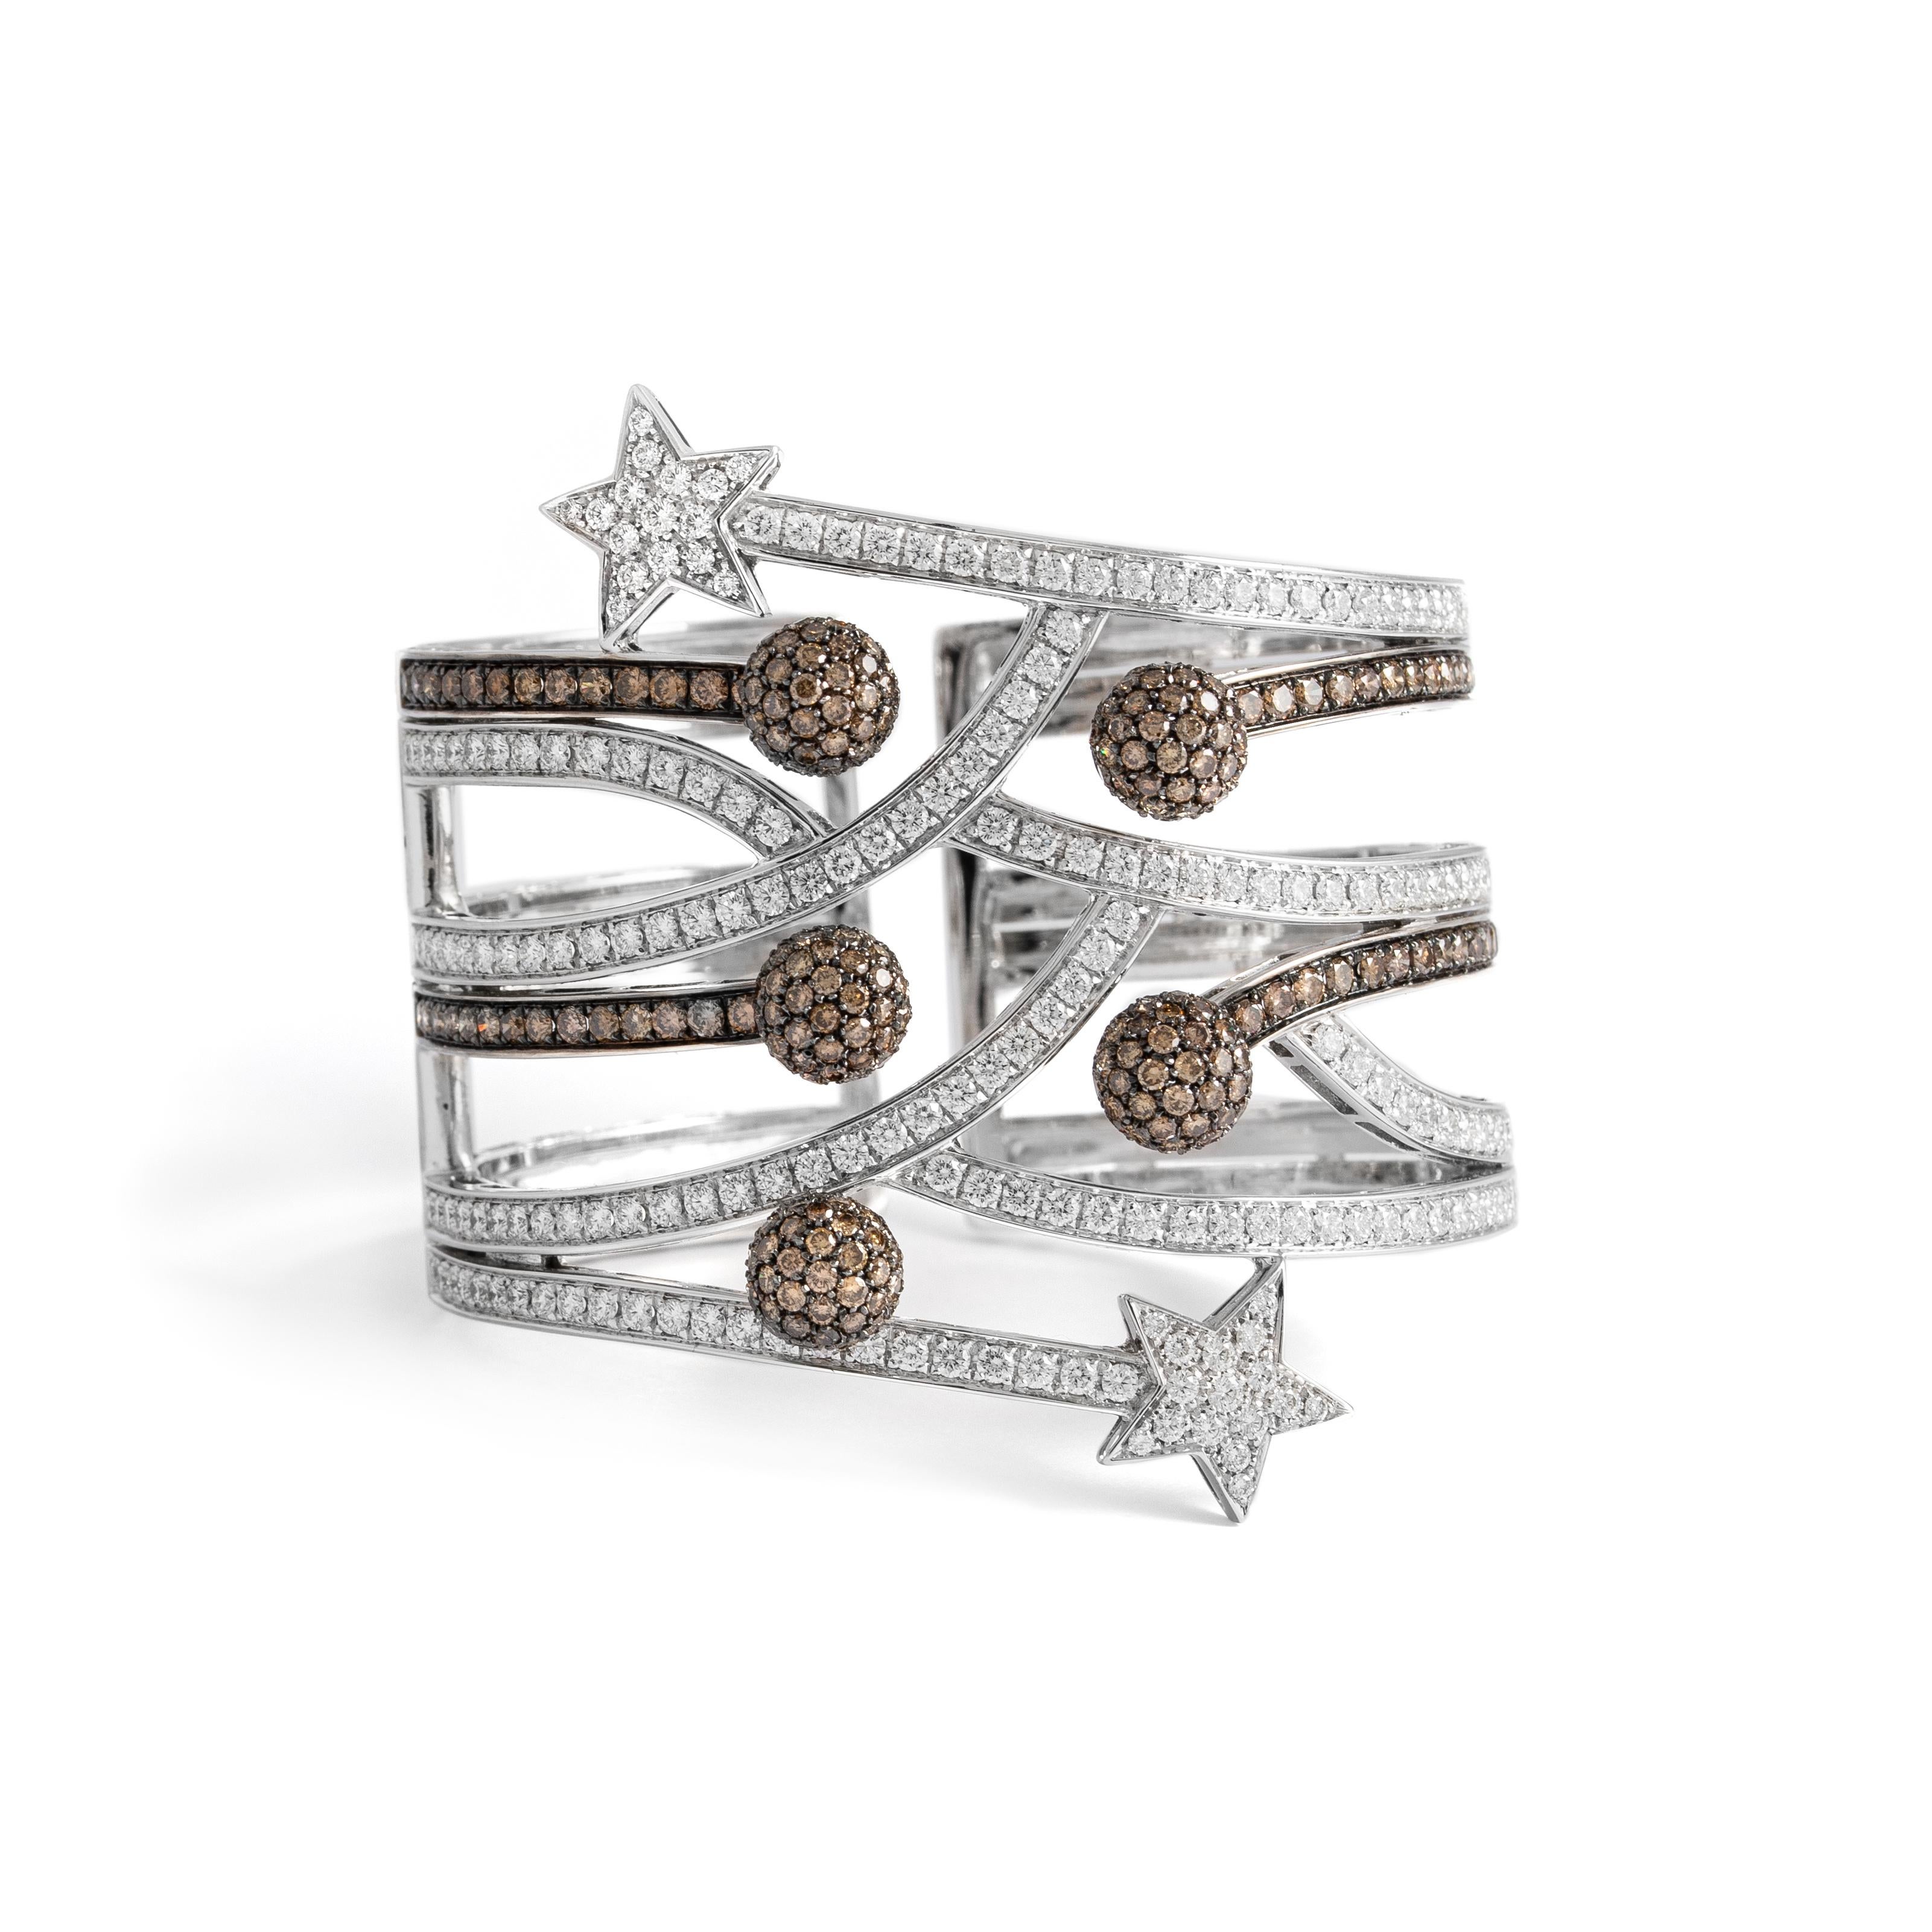 Bangle in 18kt white gold set with 229 diamonds 7.69 cts and 287 brown diamonds 7.94 carats.    
Inner circumference: Approximately 16.96 centimeters ( 6.68 inches).
Total weight: 92.74 grams.
Width on the top: Approximately 6.00 centimeters ( 2.36